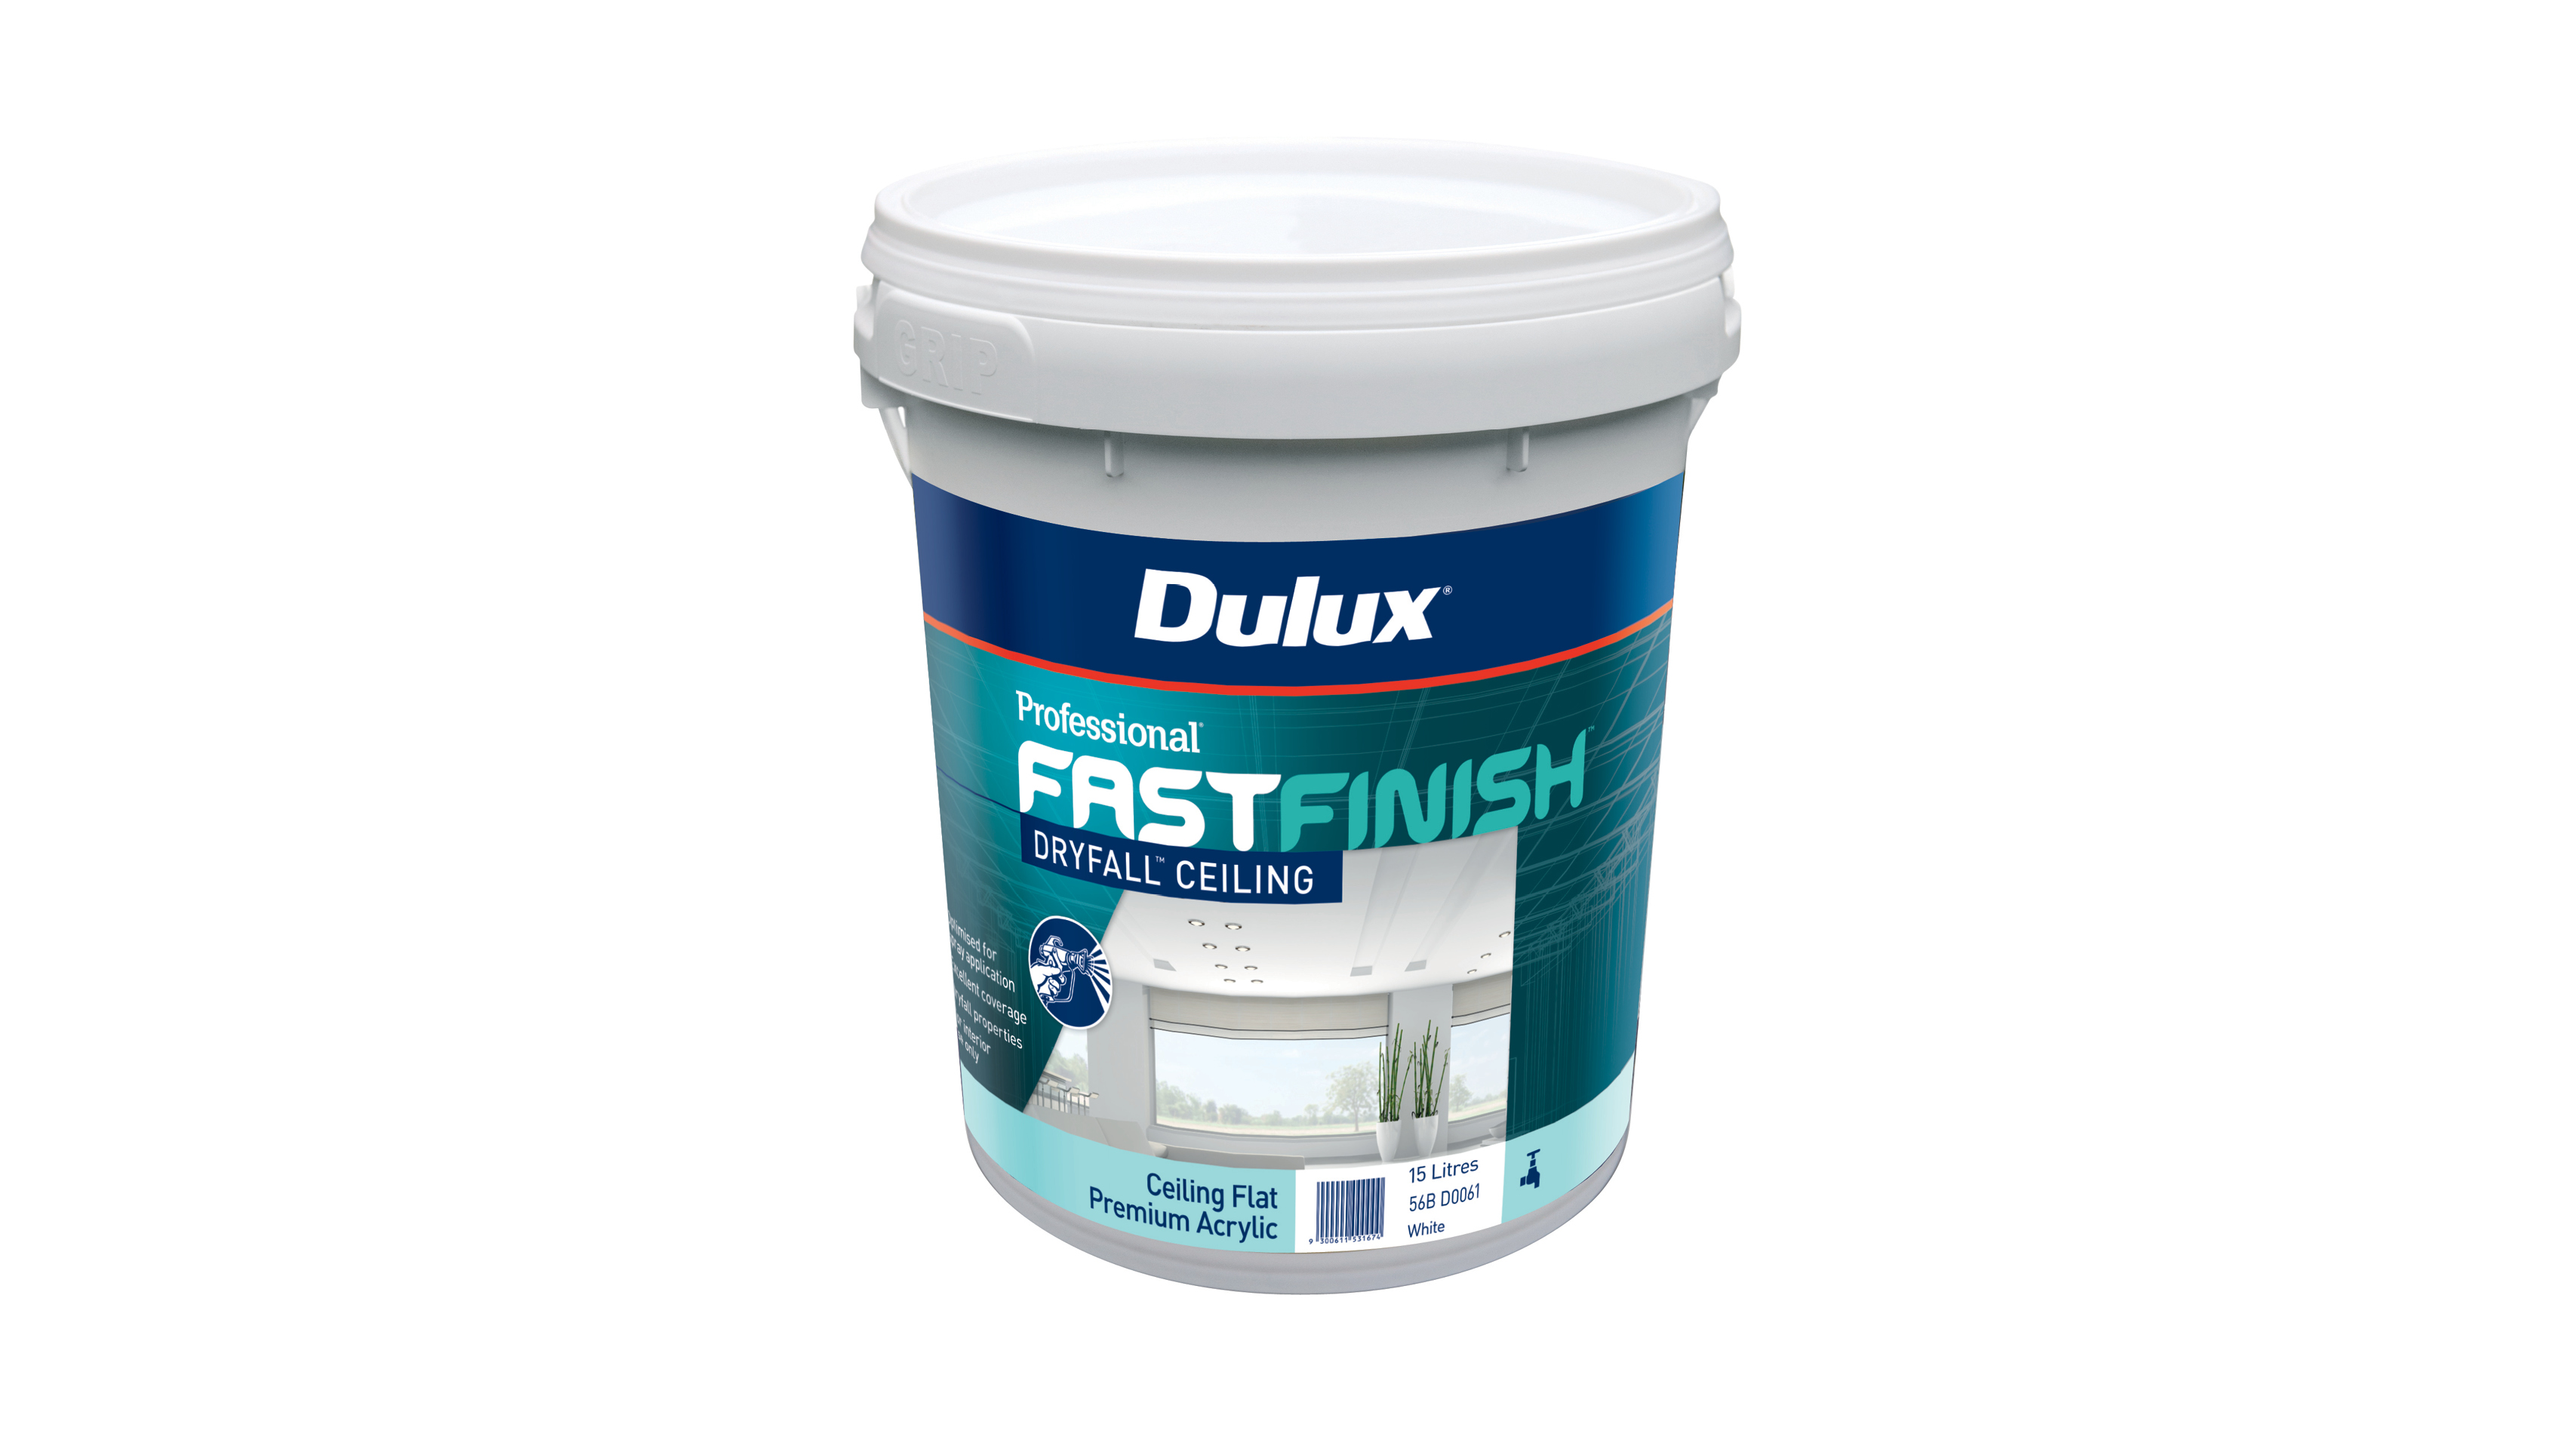 Dulux Professional Fast Finish Dry Fall Ceiling White Flat